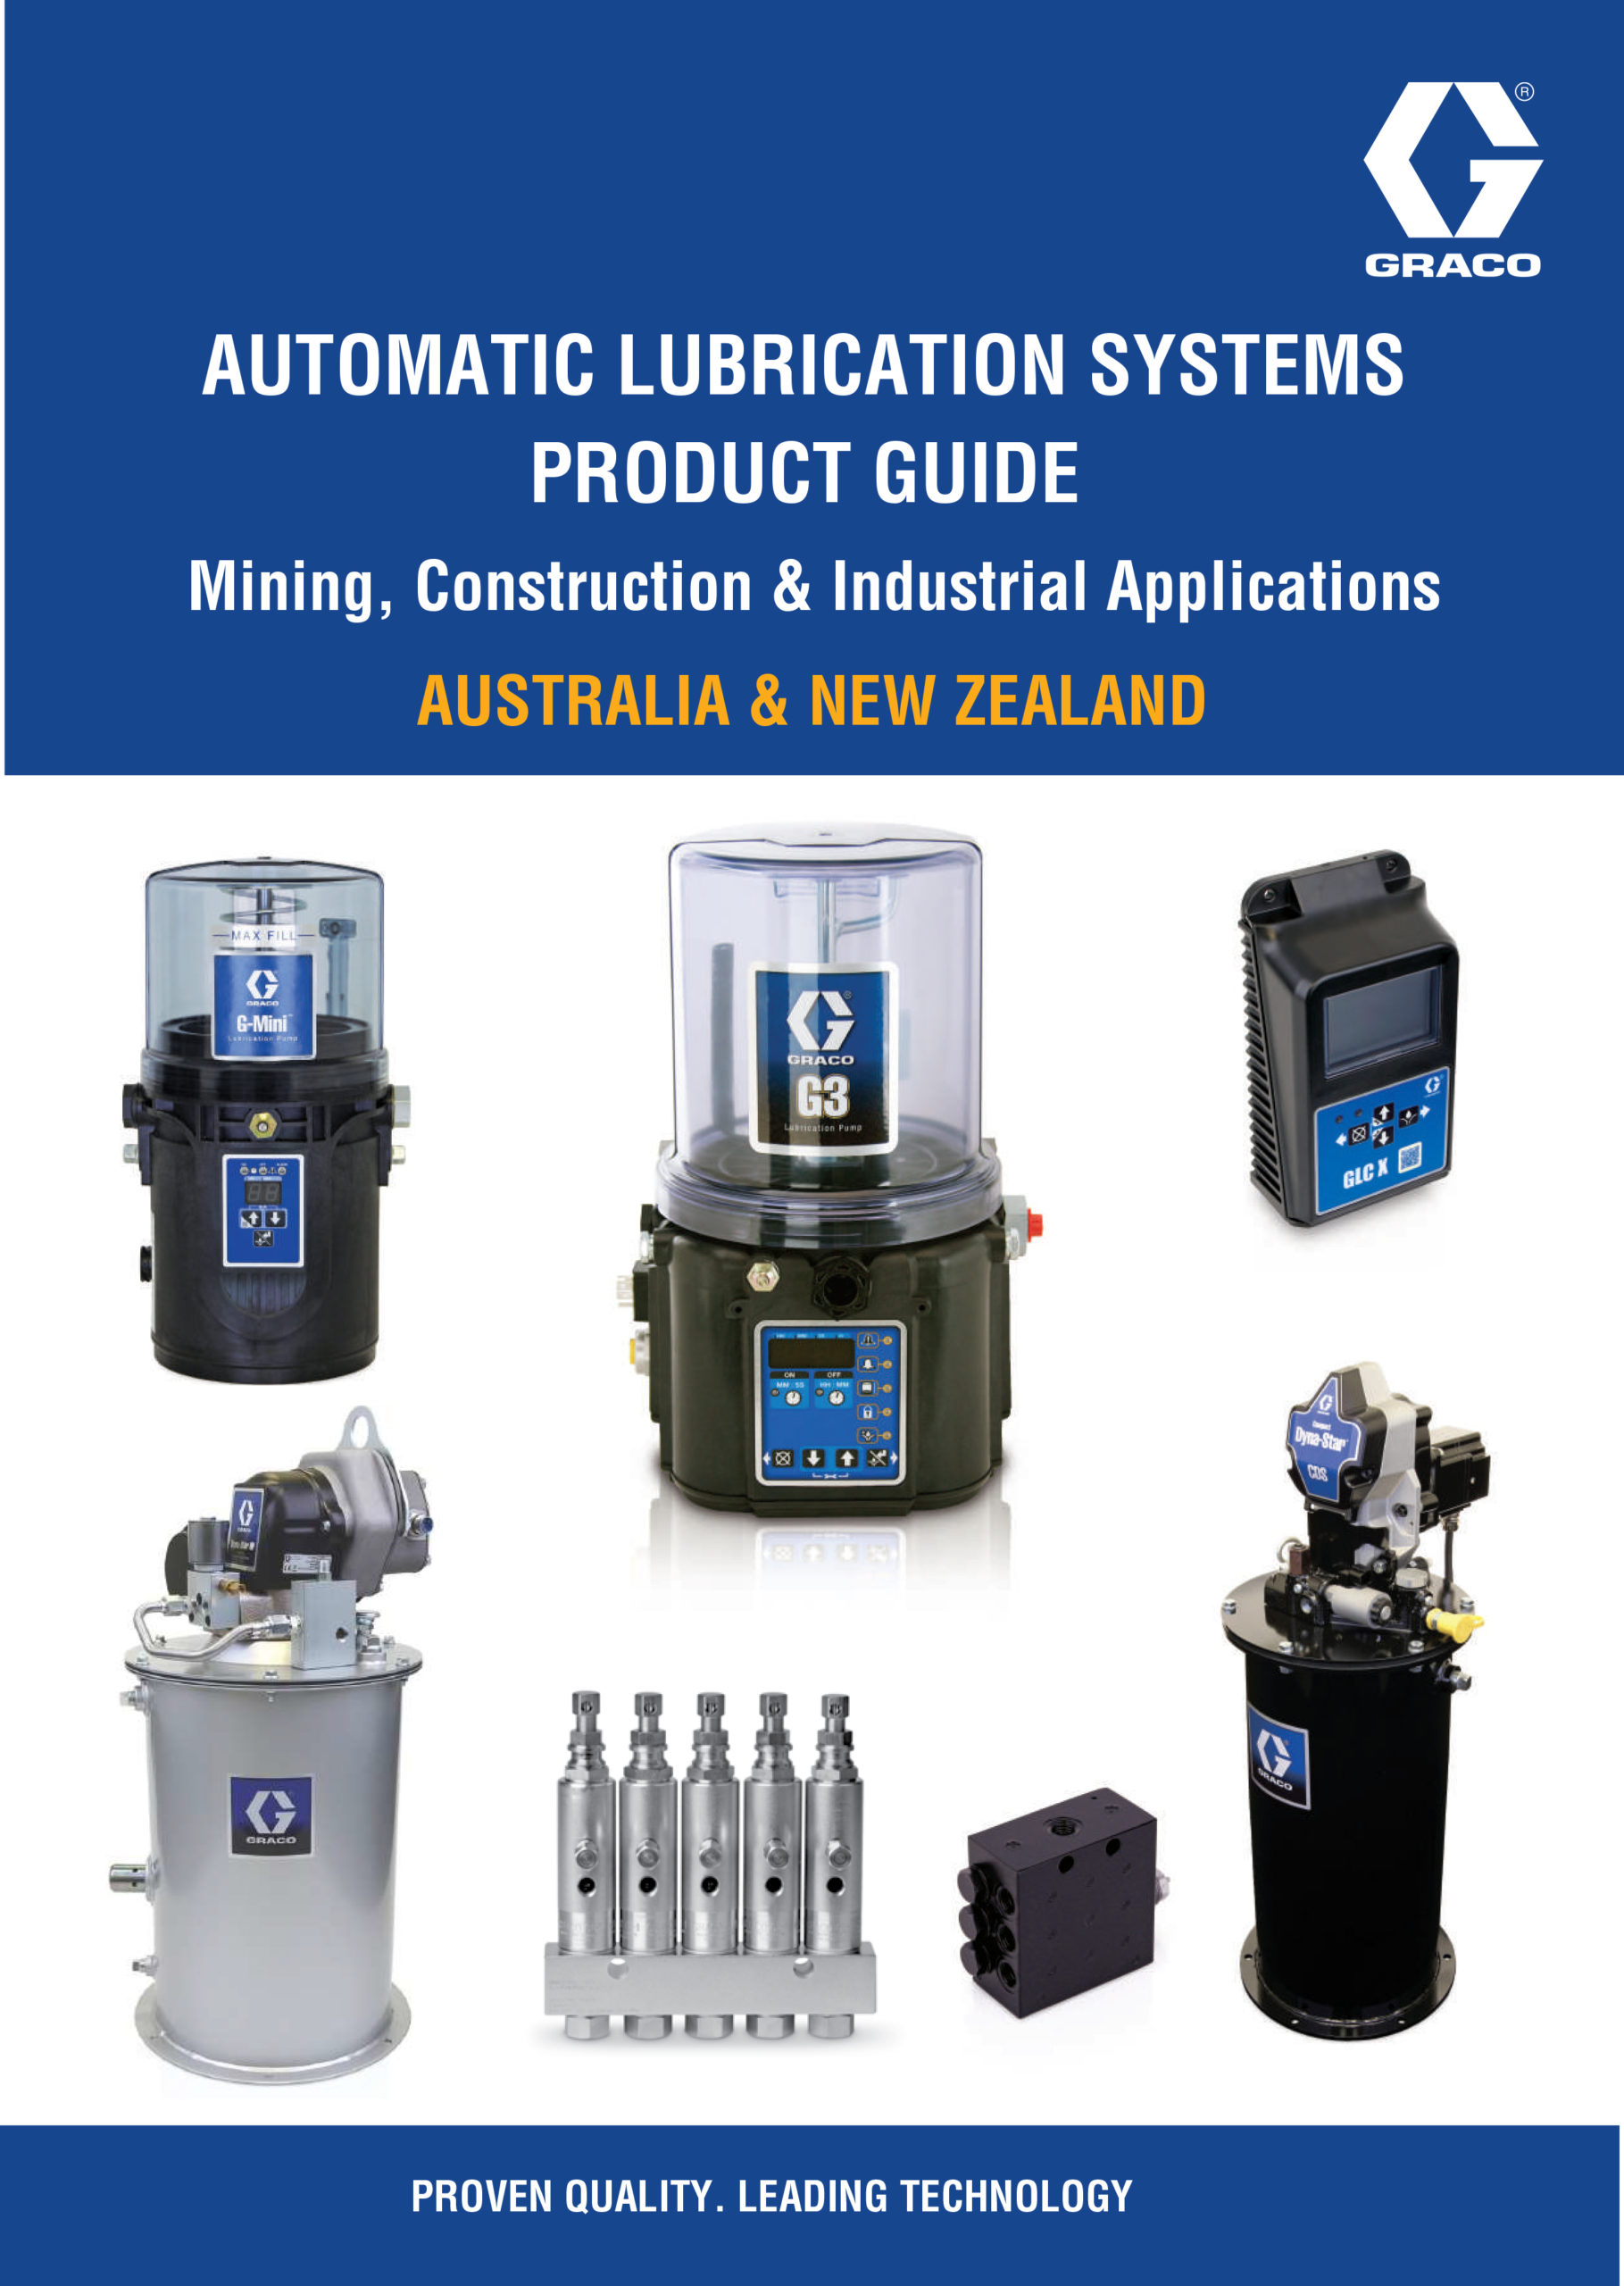 Graco Automatic Lubrication System Product Guide